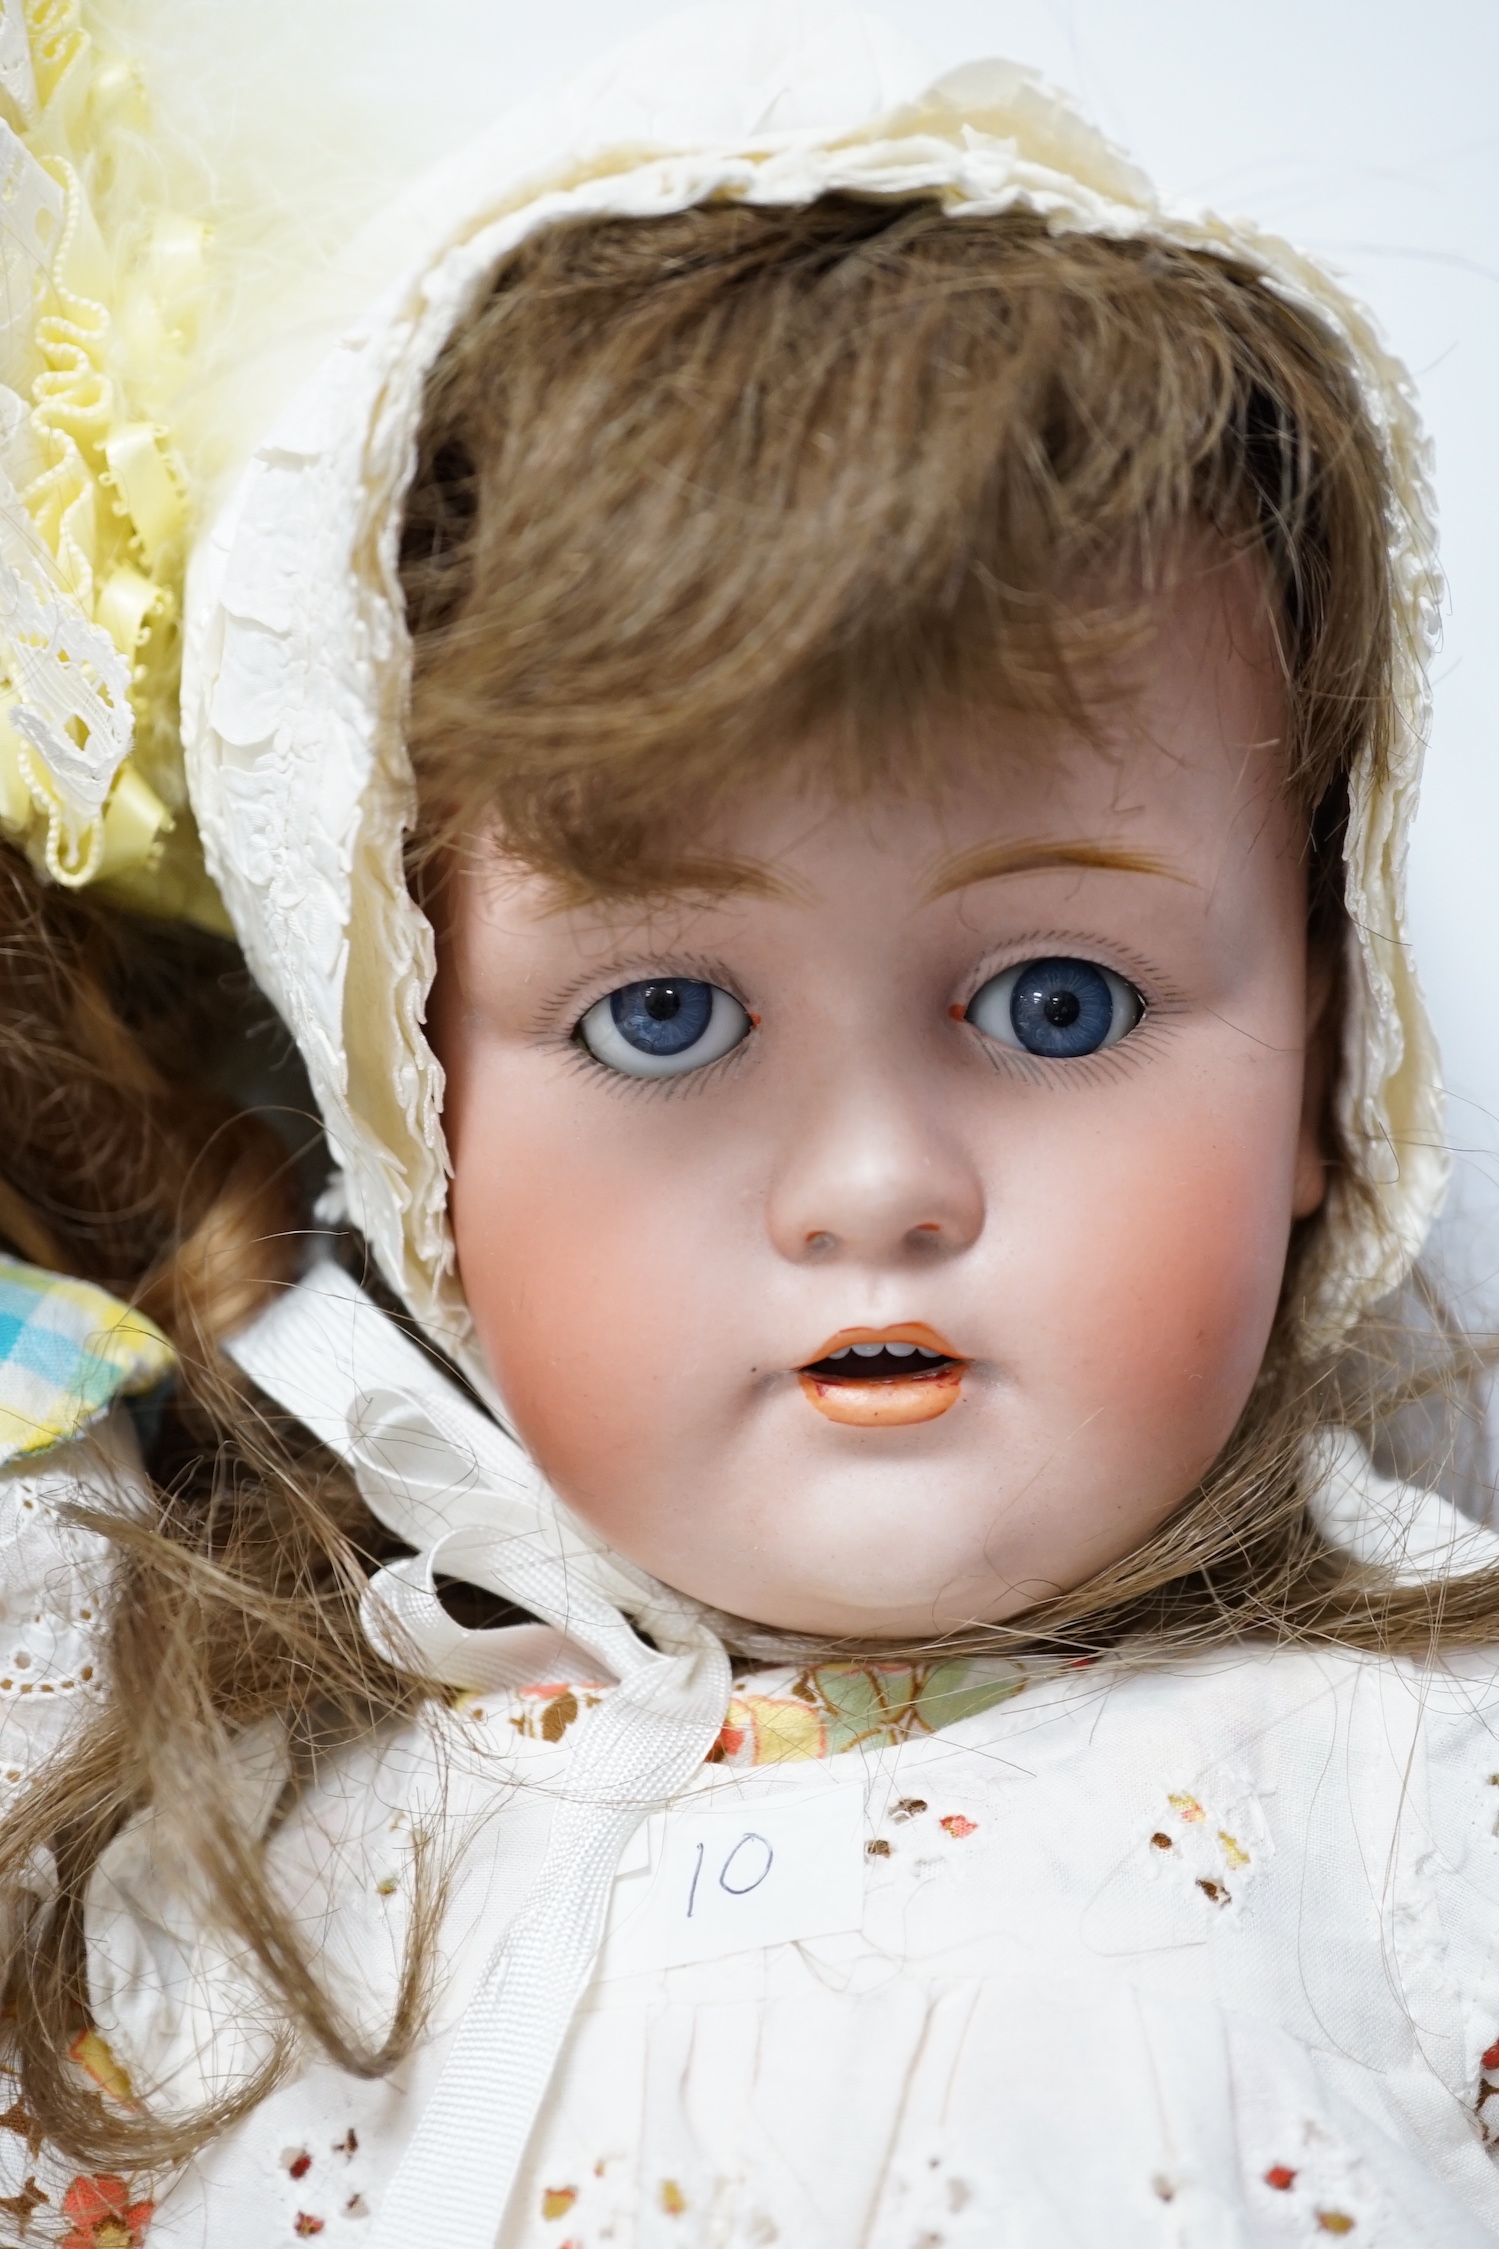 A Kestner JDK 168 bisque doll, 65cm and an AM390 doll with bisque head, 65cm